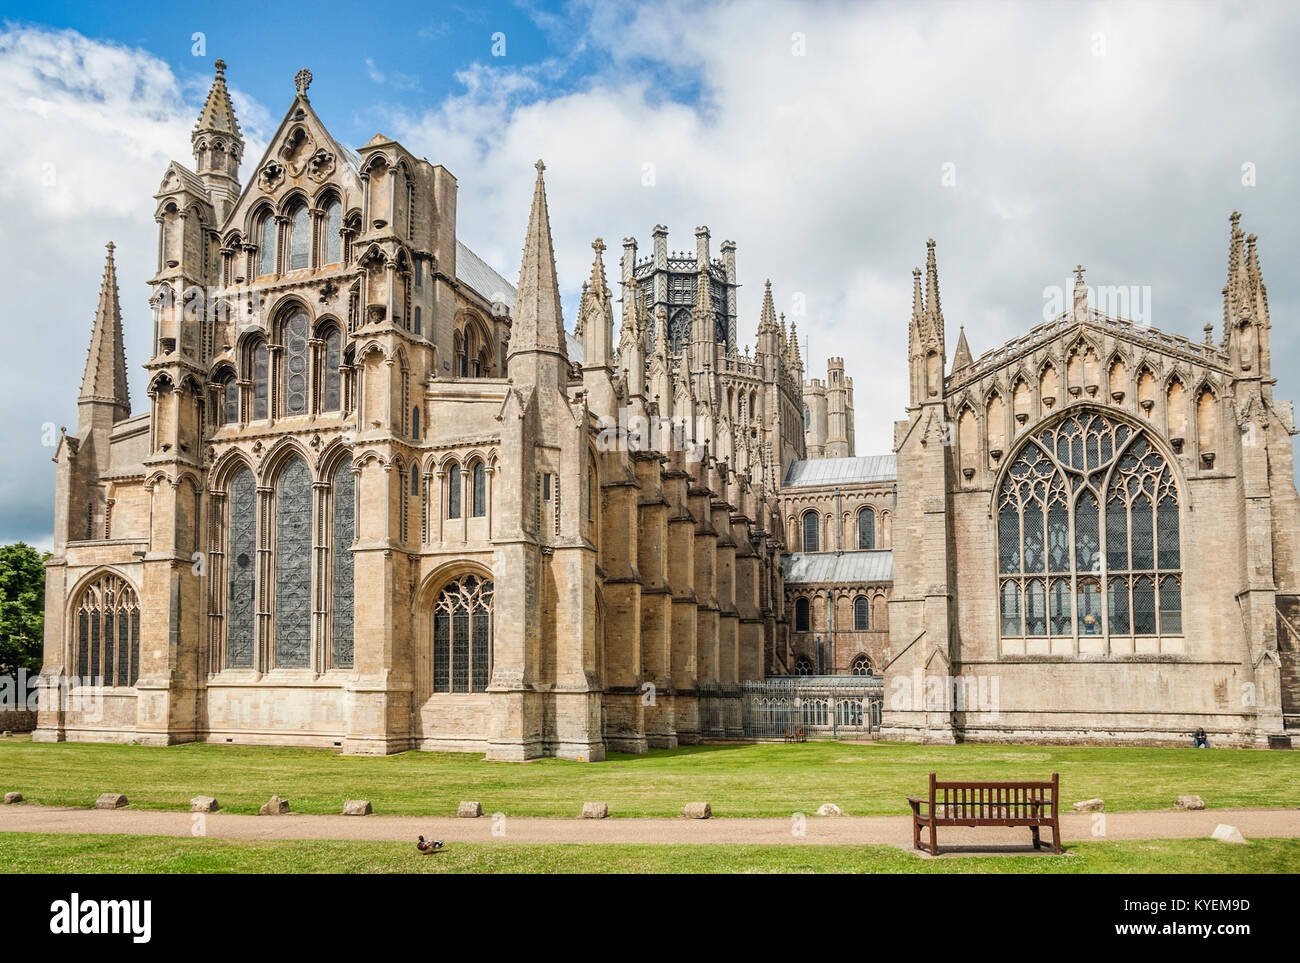 Die Kathedrale von Lincoln, Lincoln, Lincolnshire, England Stockfoto